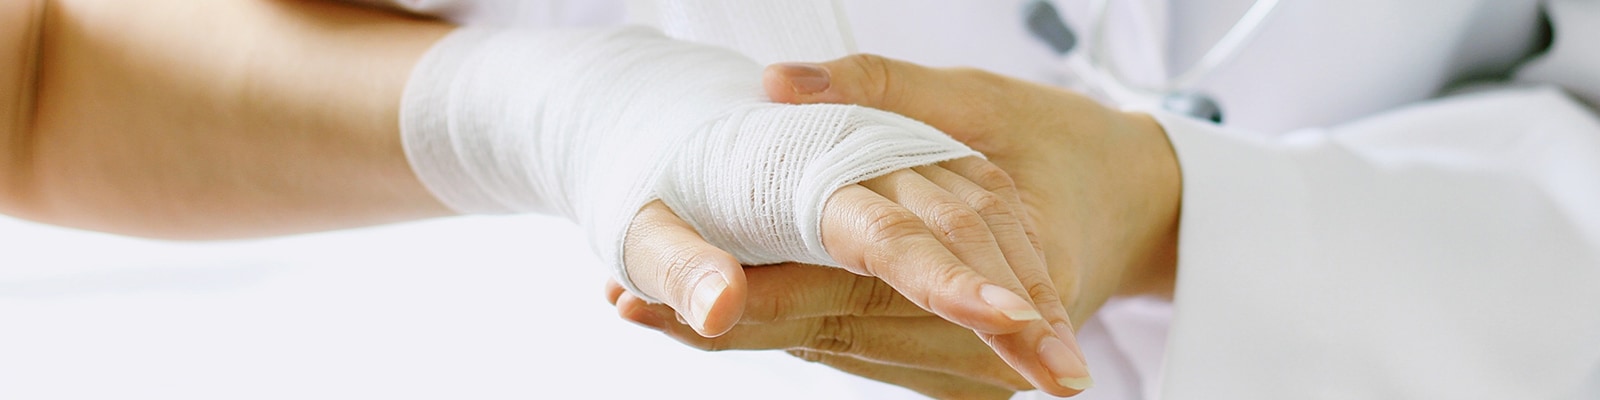 Wound Care Supplies and Products  | Henry Schein Medical